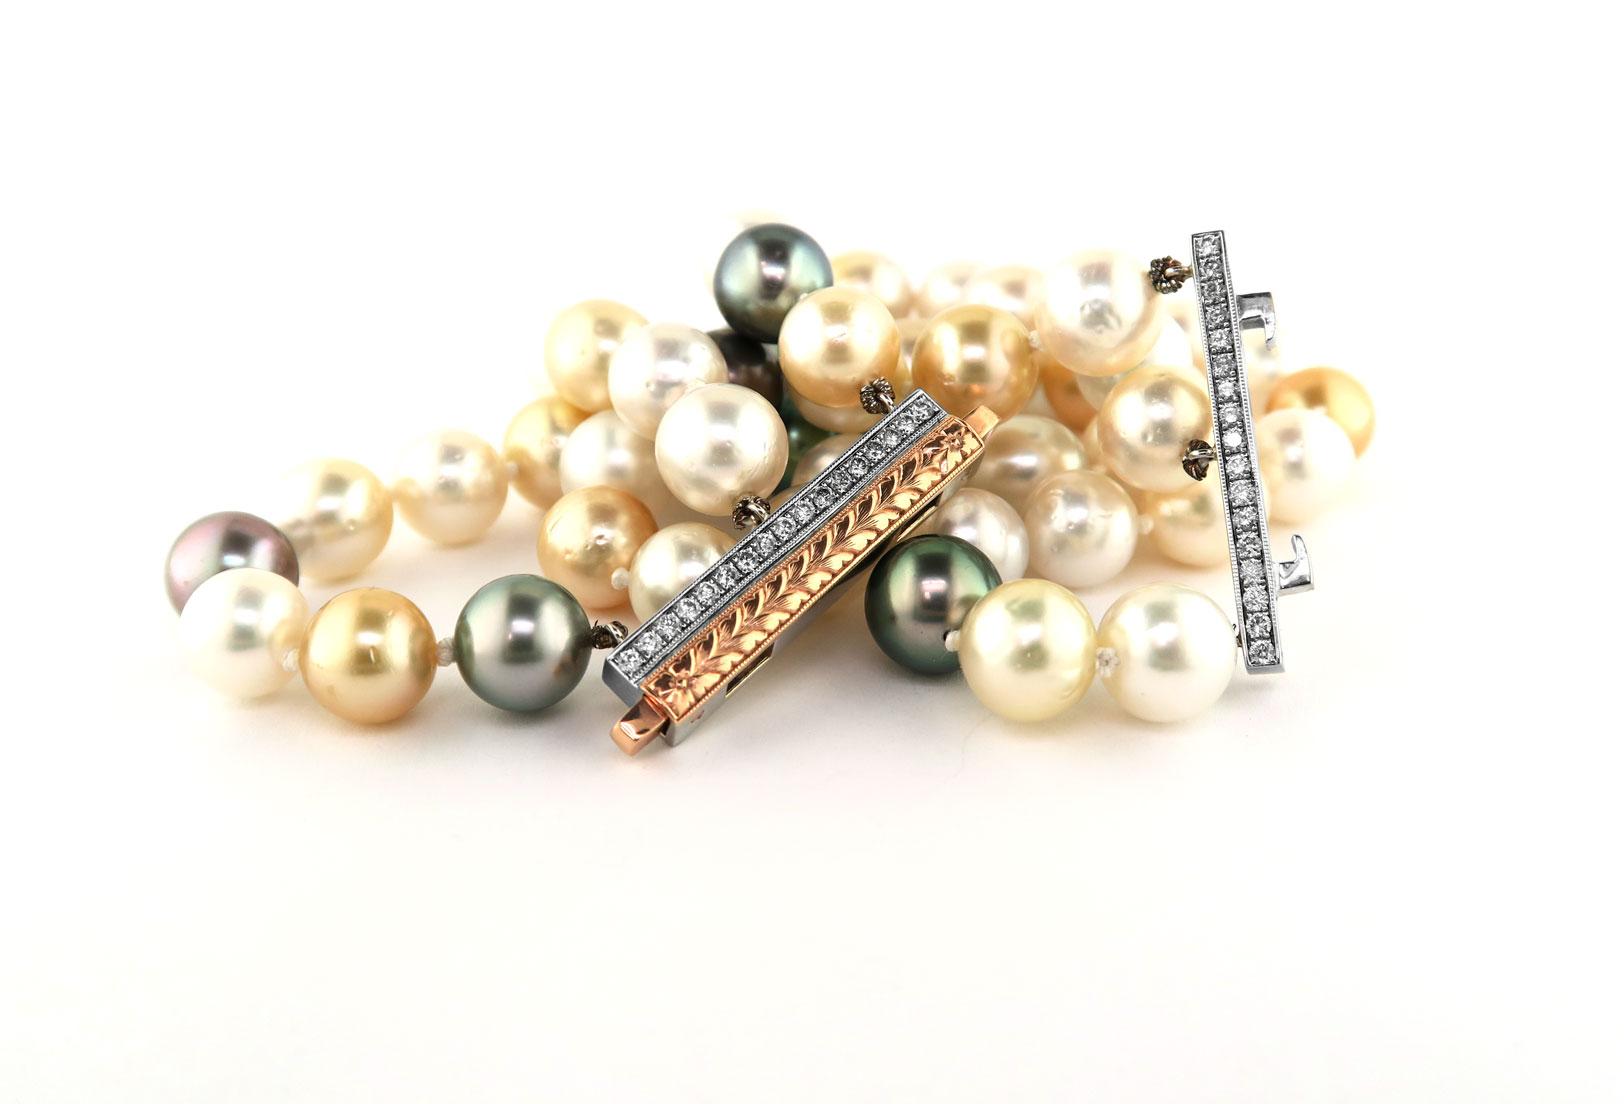 Introducing the 18 Karat White Gold and 18 Karat Rose Gold South Sea Pearl Bracelet, a timeless piece of jewelry that is steeped in tradition and beauty. Pearls have a rich history, with women adorning themselves with these gems as far back as the